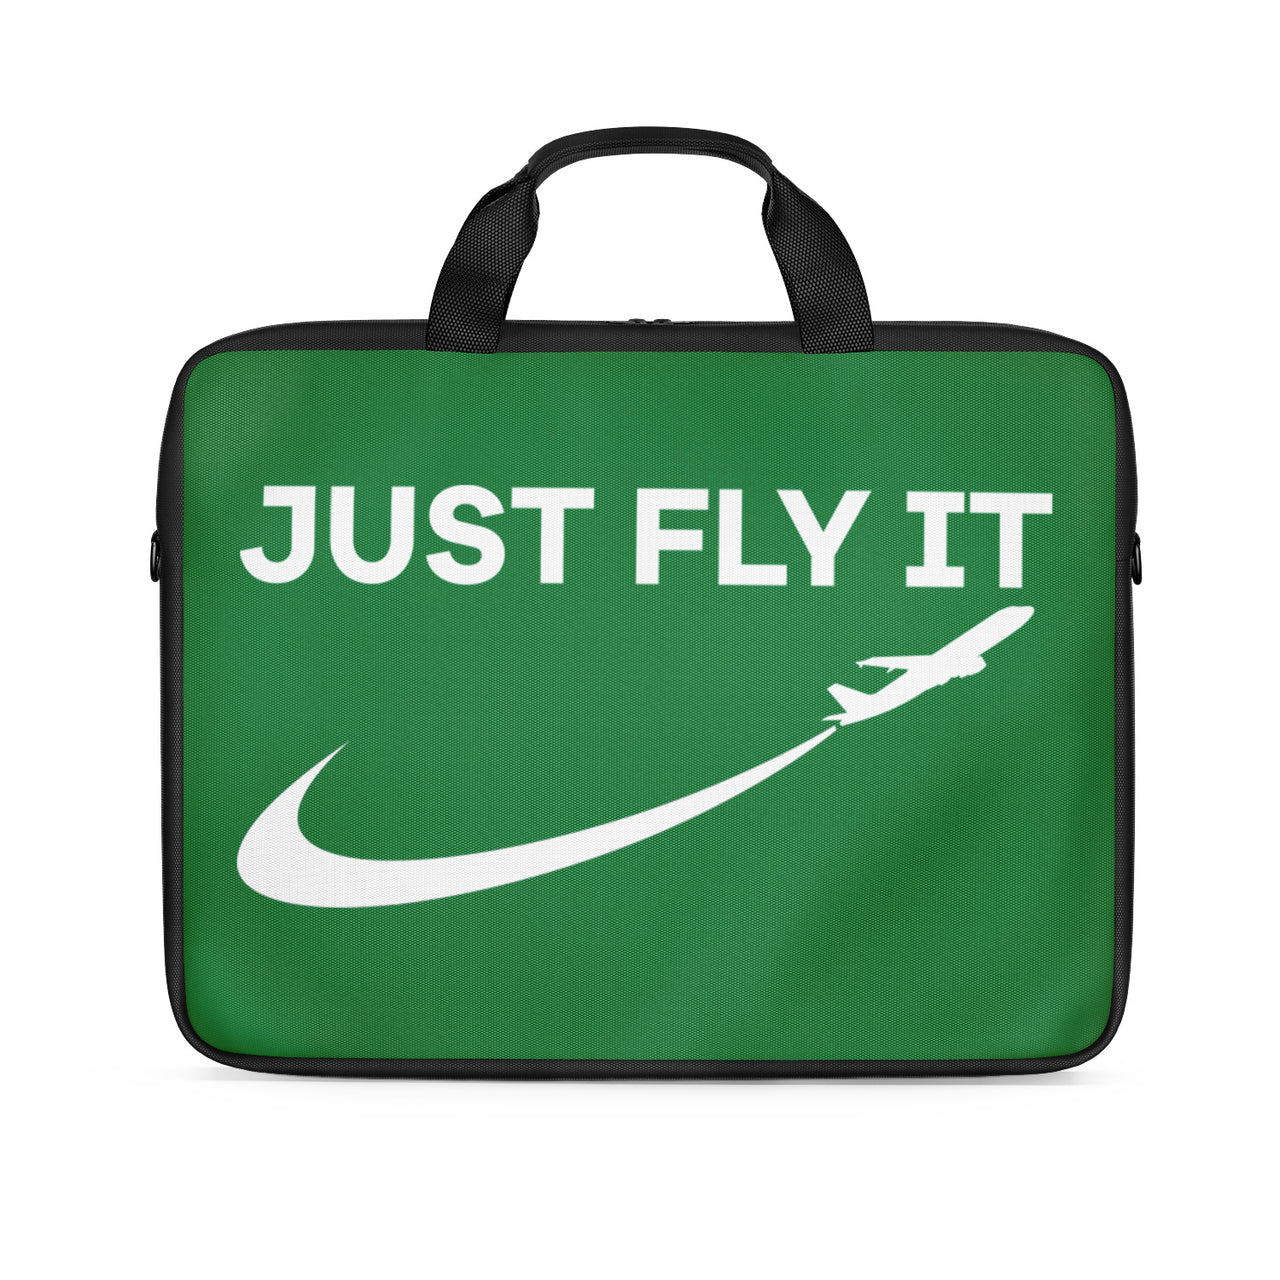 Just Fly It 2 Designed Laptop & Tablet Bags